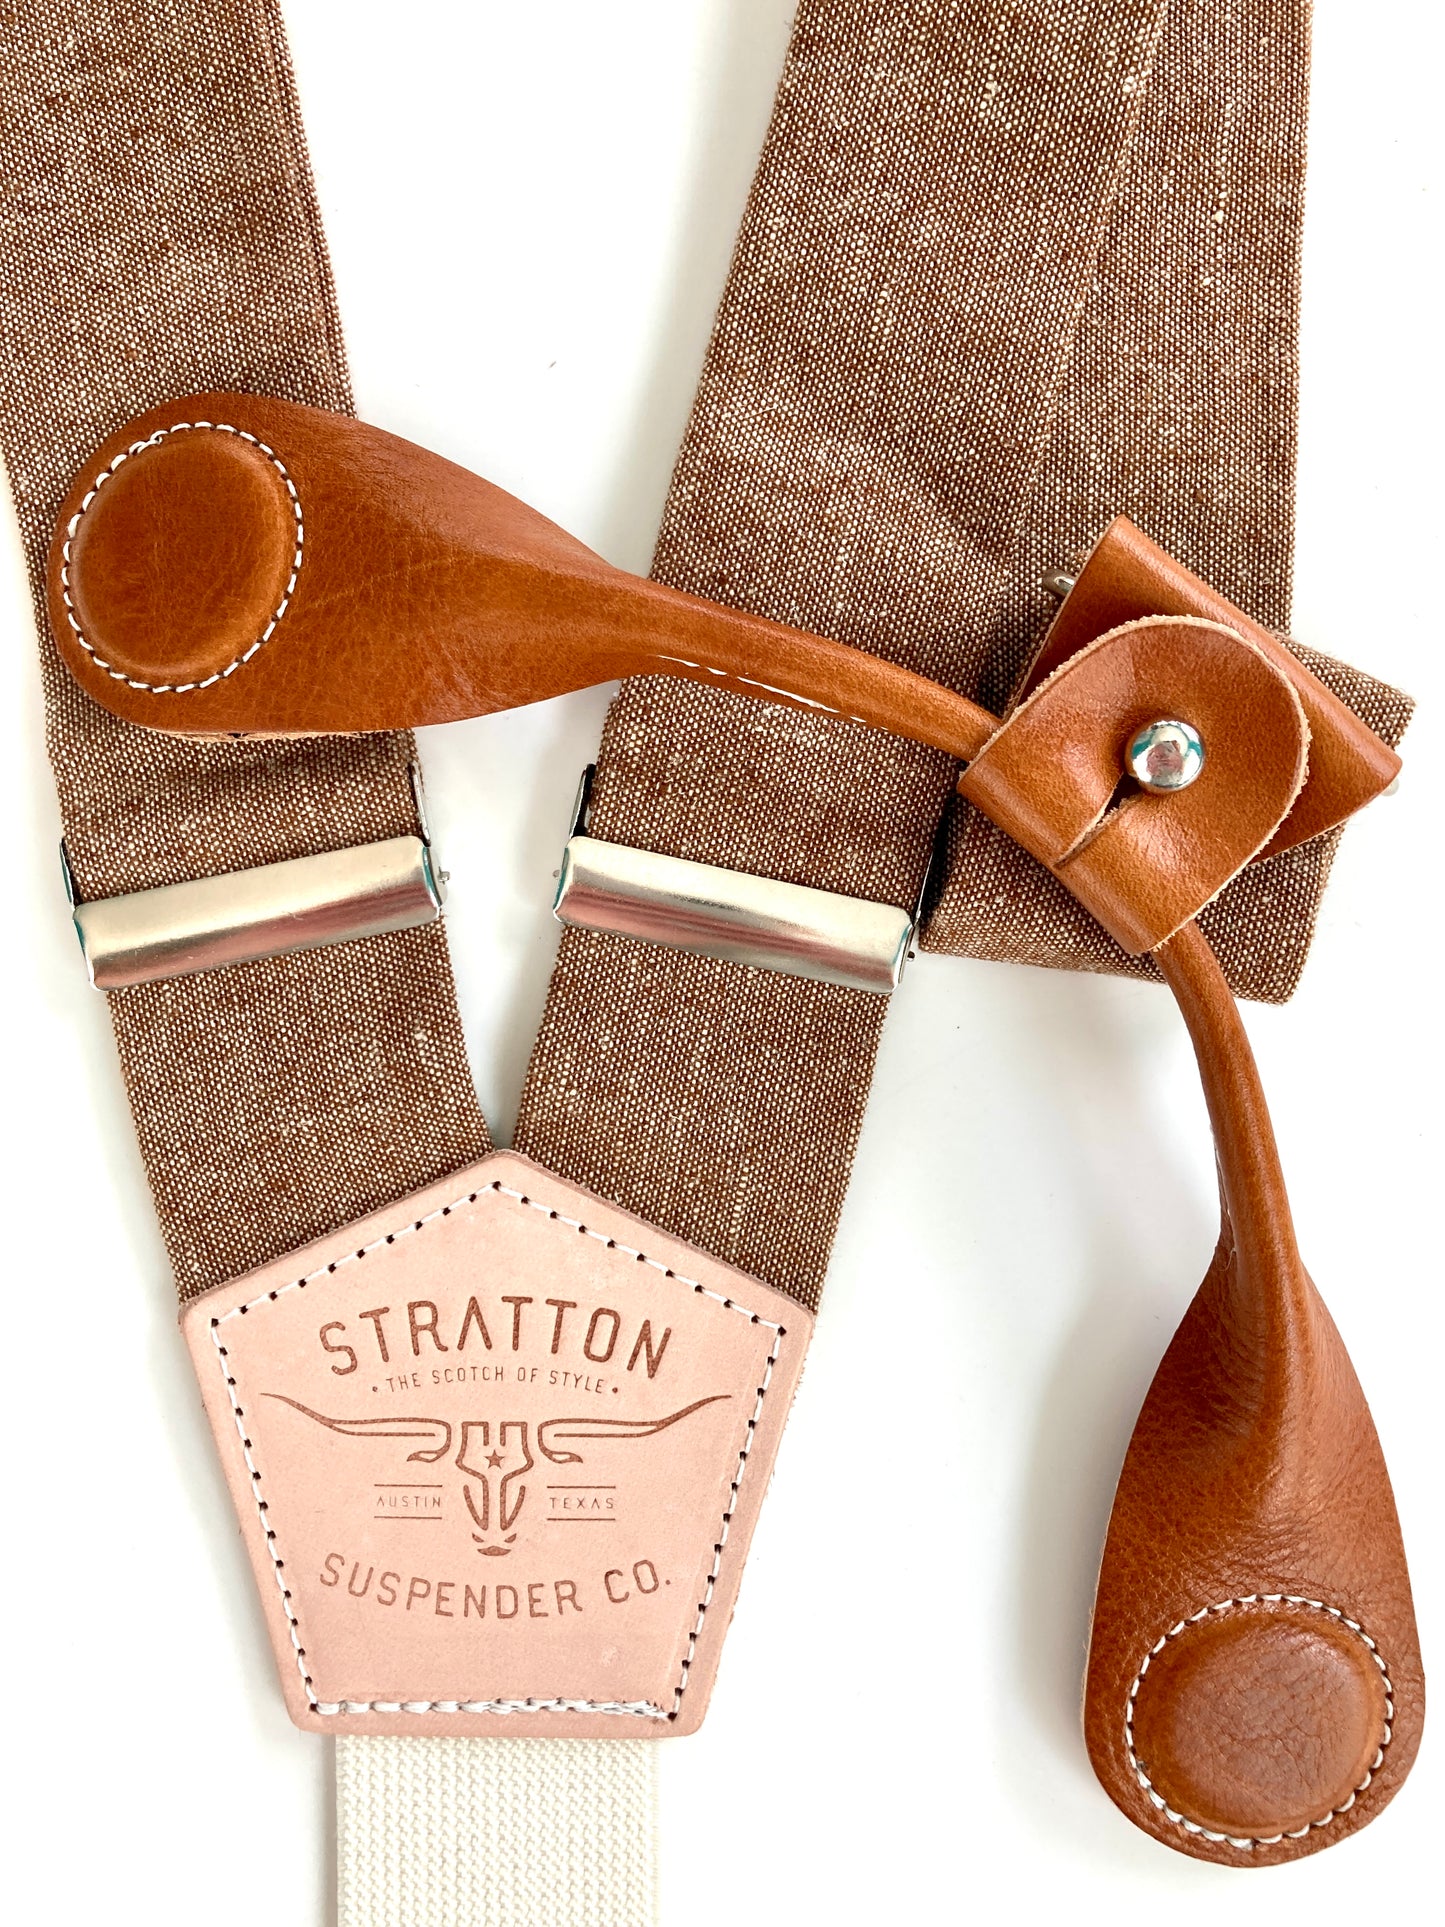 Stratton Suspender Co. features the Nutmeg (brown) linen suspenders on veg tan shoulder leather with cream colored elastic back strap for the Fall 2022 suspenders collection Magnetic Stratton Suspender clasps in Tan Pontedero Italian leather hand-picked by Stratton Suspender Co.